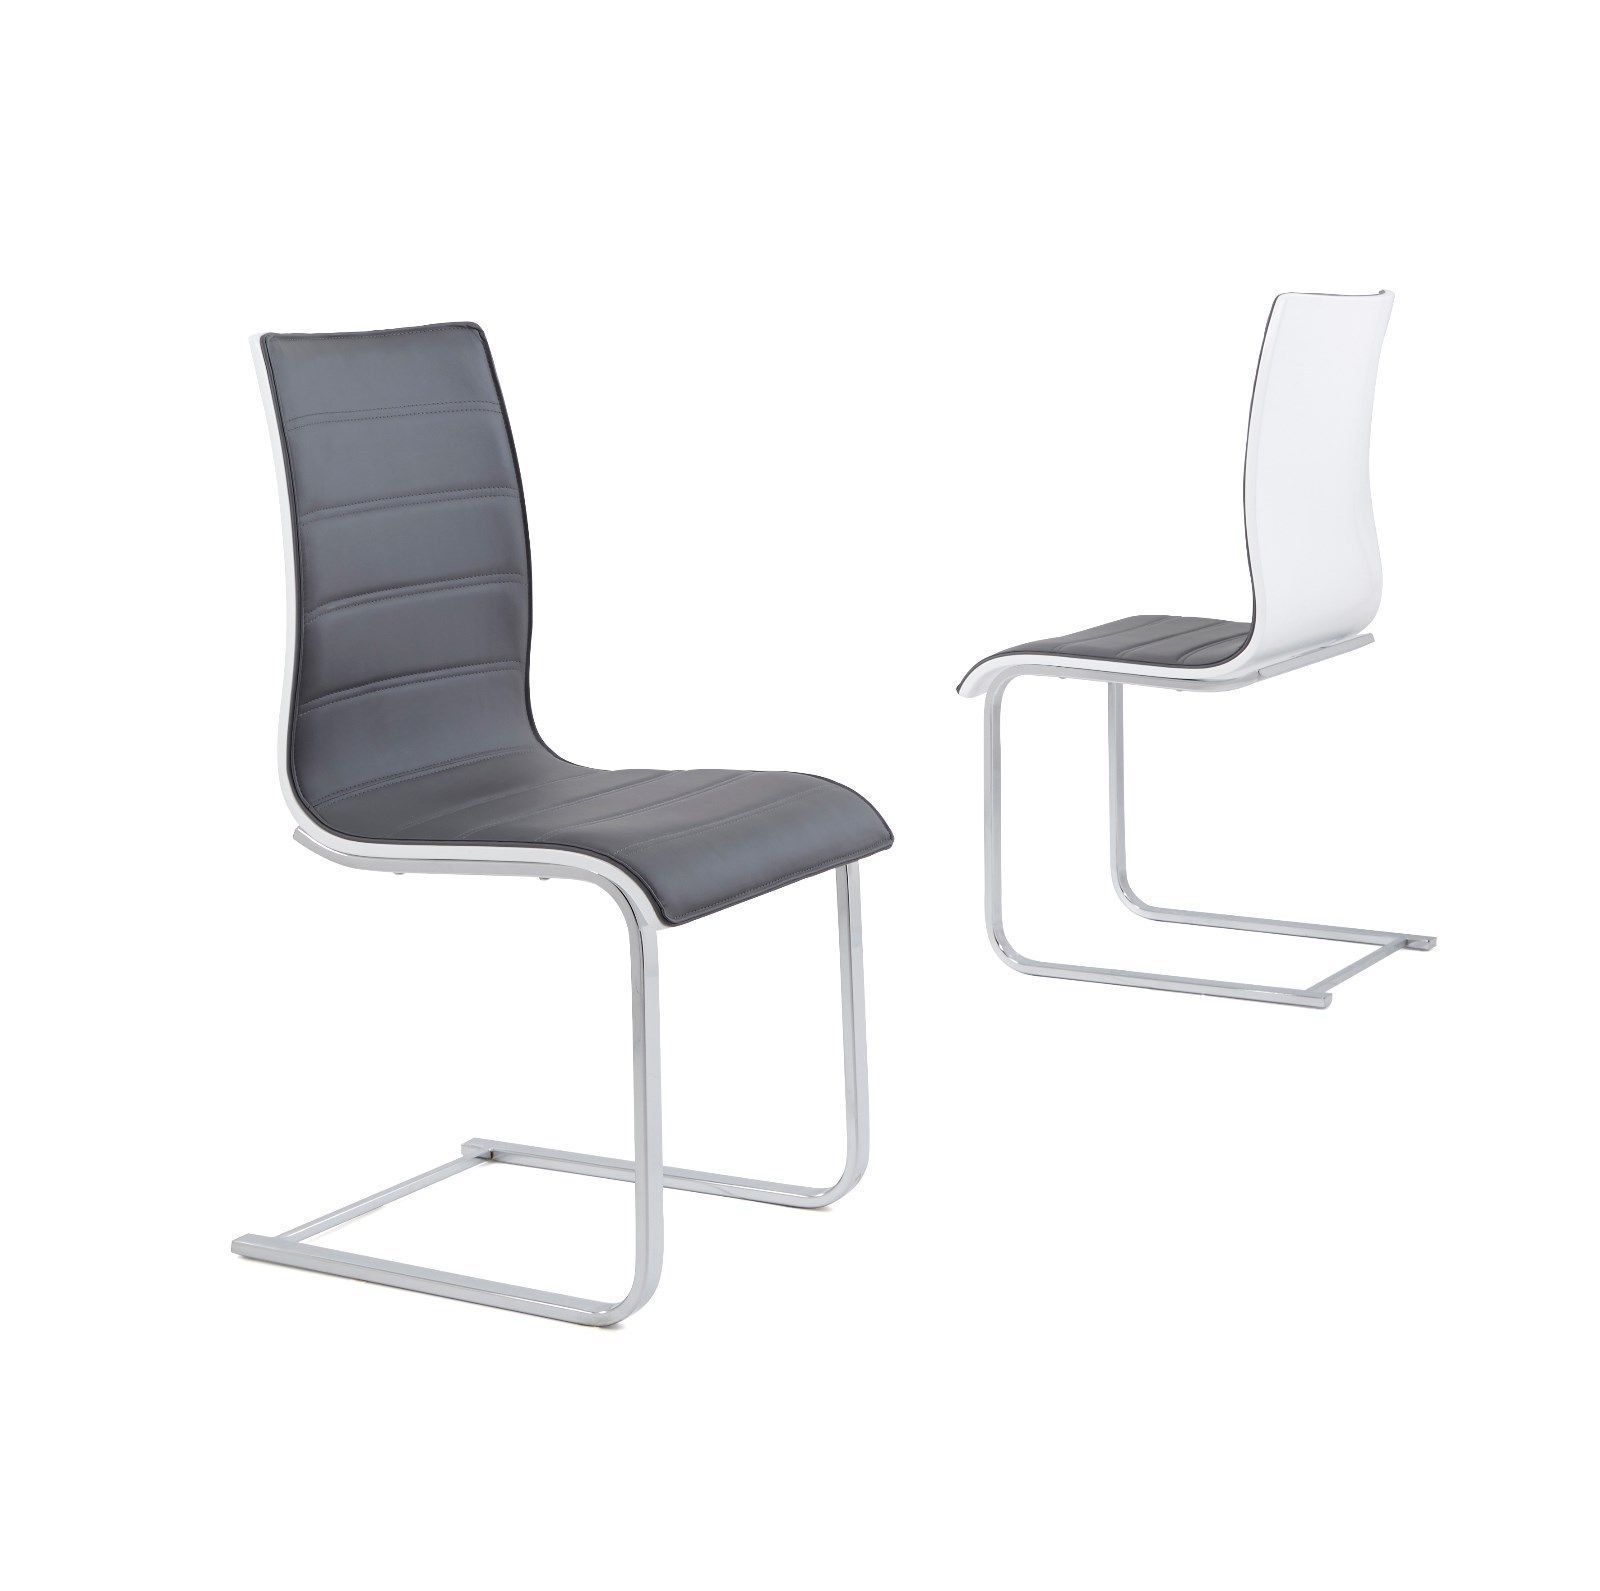 Widely Used Grey Dining Chairs Pertaining To Wynn High Gloss Back Dining Chairs Only – Grey & White (View 12 of 20)